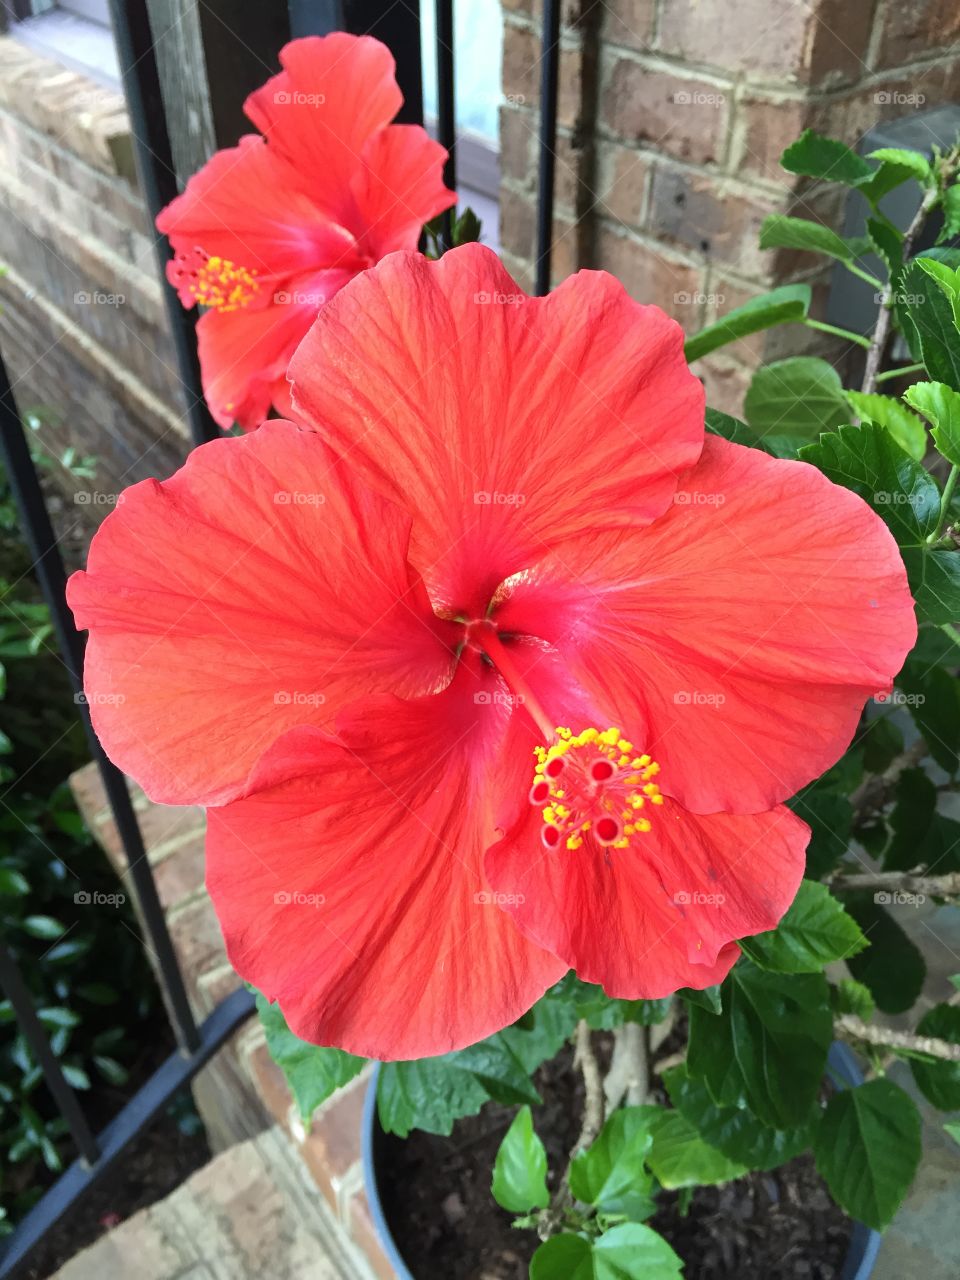 A very Hibiscus morning
